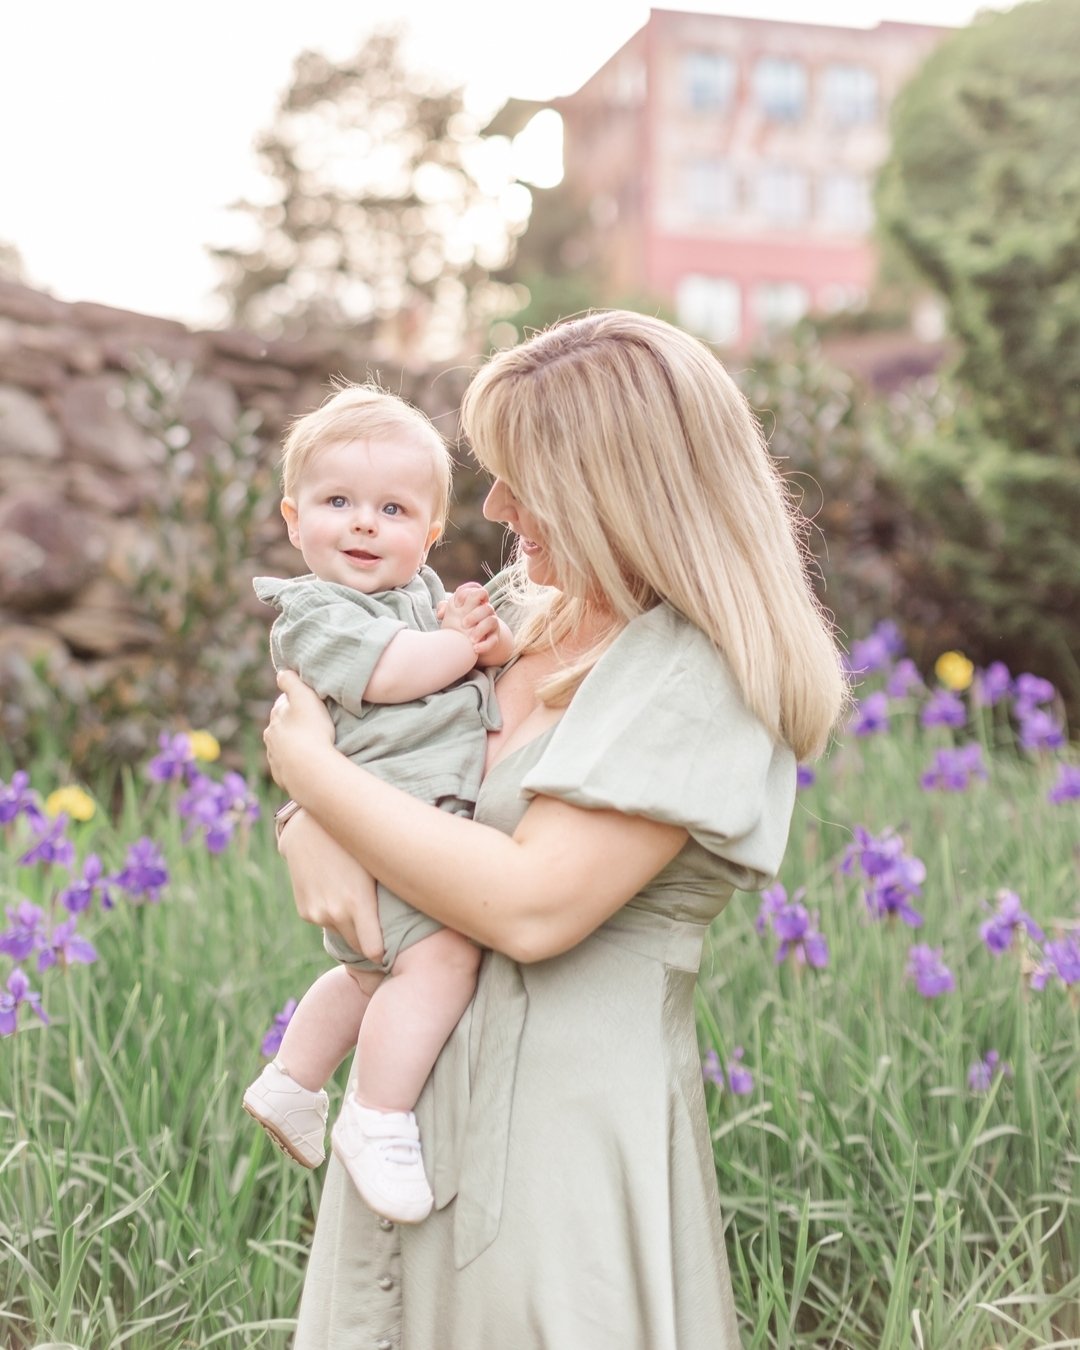 🎉✨ MAY GIVEAWAY ALERT!!! ✨ 🎉
ITS HAPPENING.....I'm giving away a full family photo session (up to $400 in value) to one mom or mom-to-be in honor of Mother's Day! 🫶
.
Simply follow these steps to enter: 
1️⃣ Like and save this post
2️⃣ Follow this